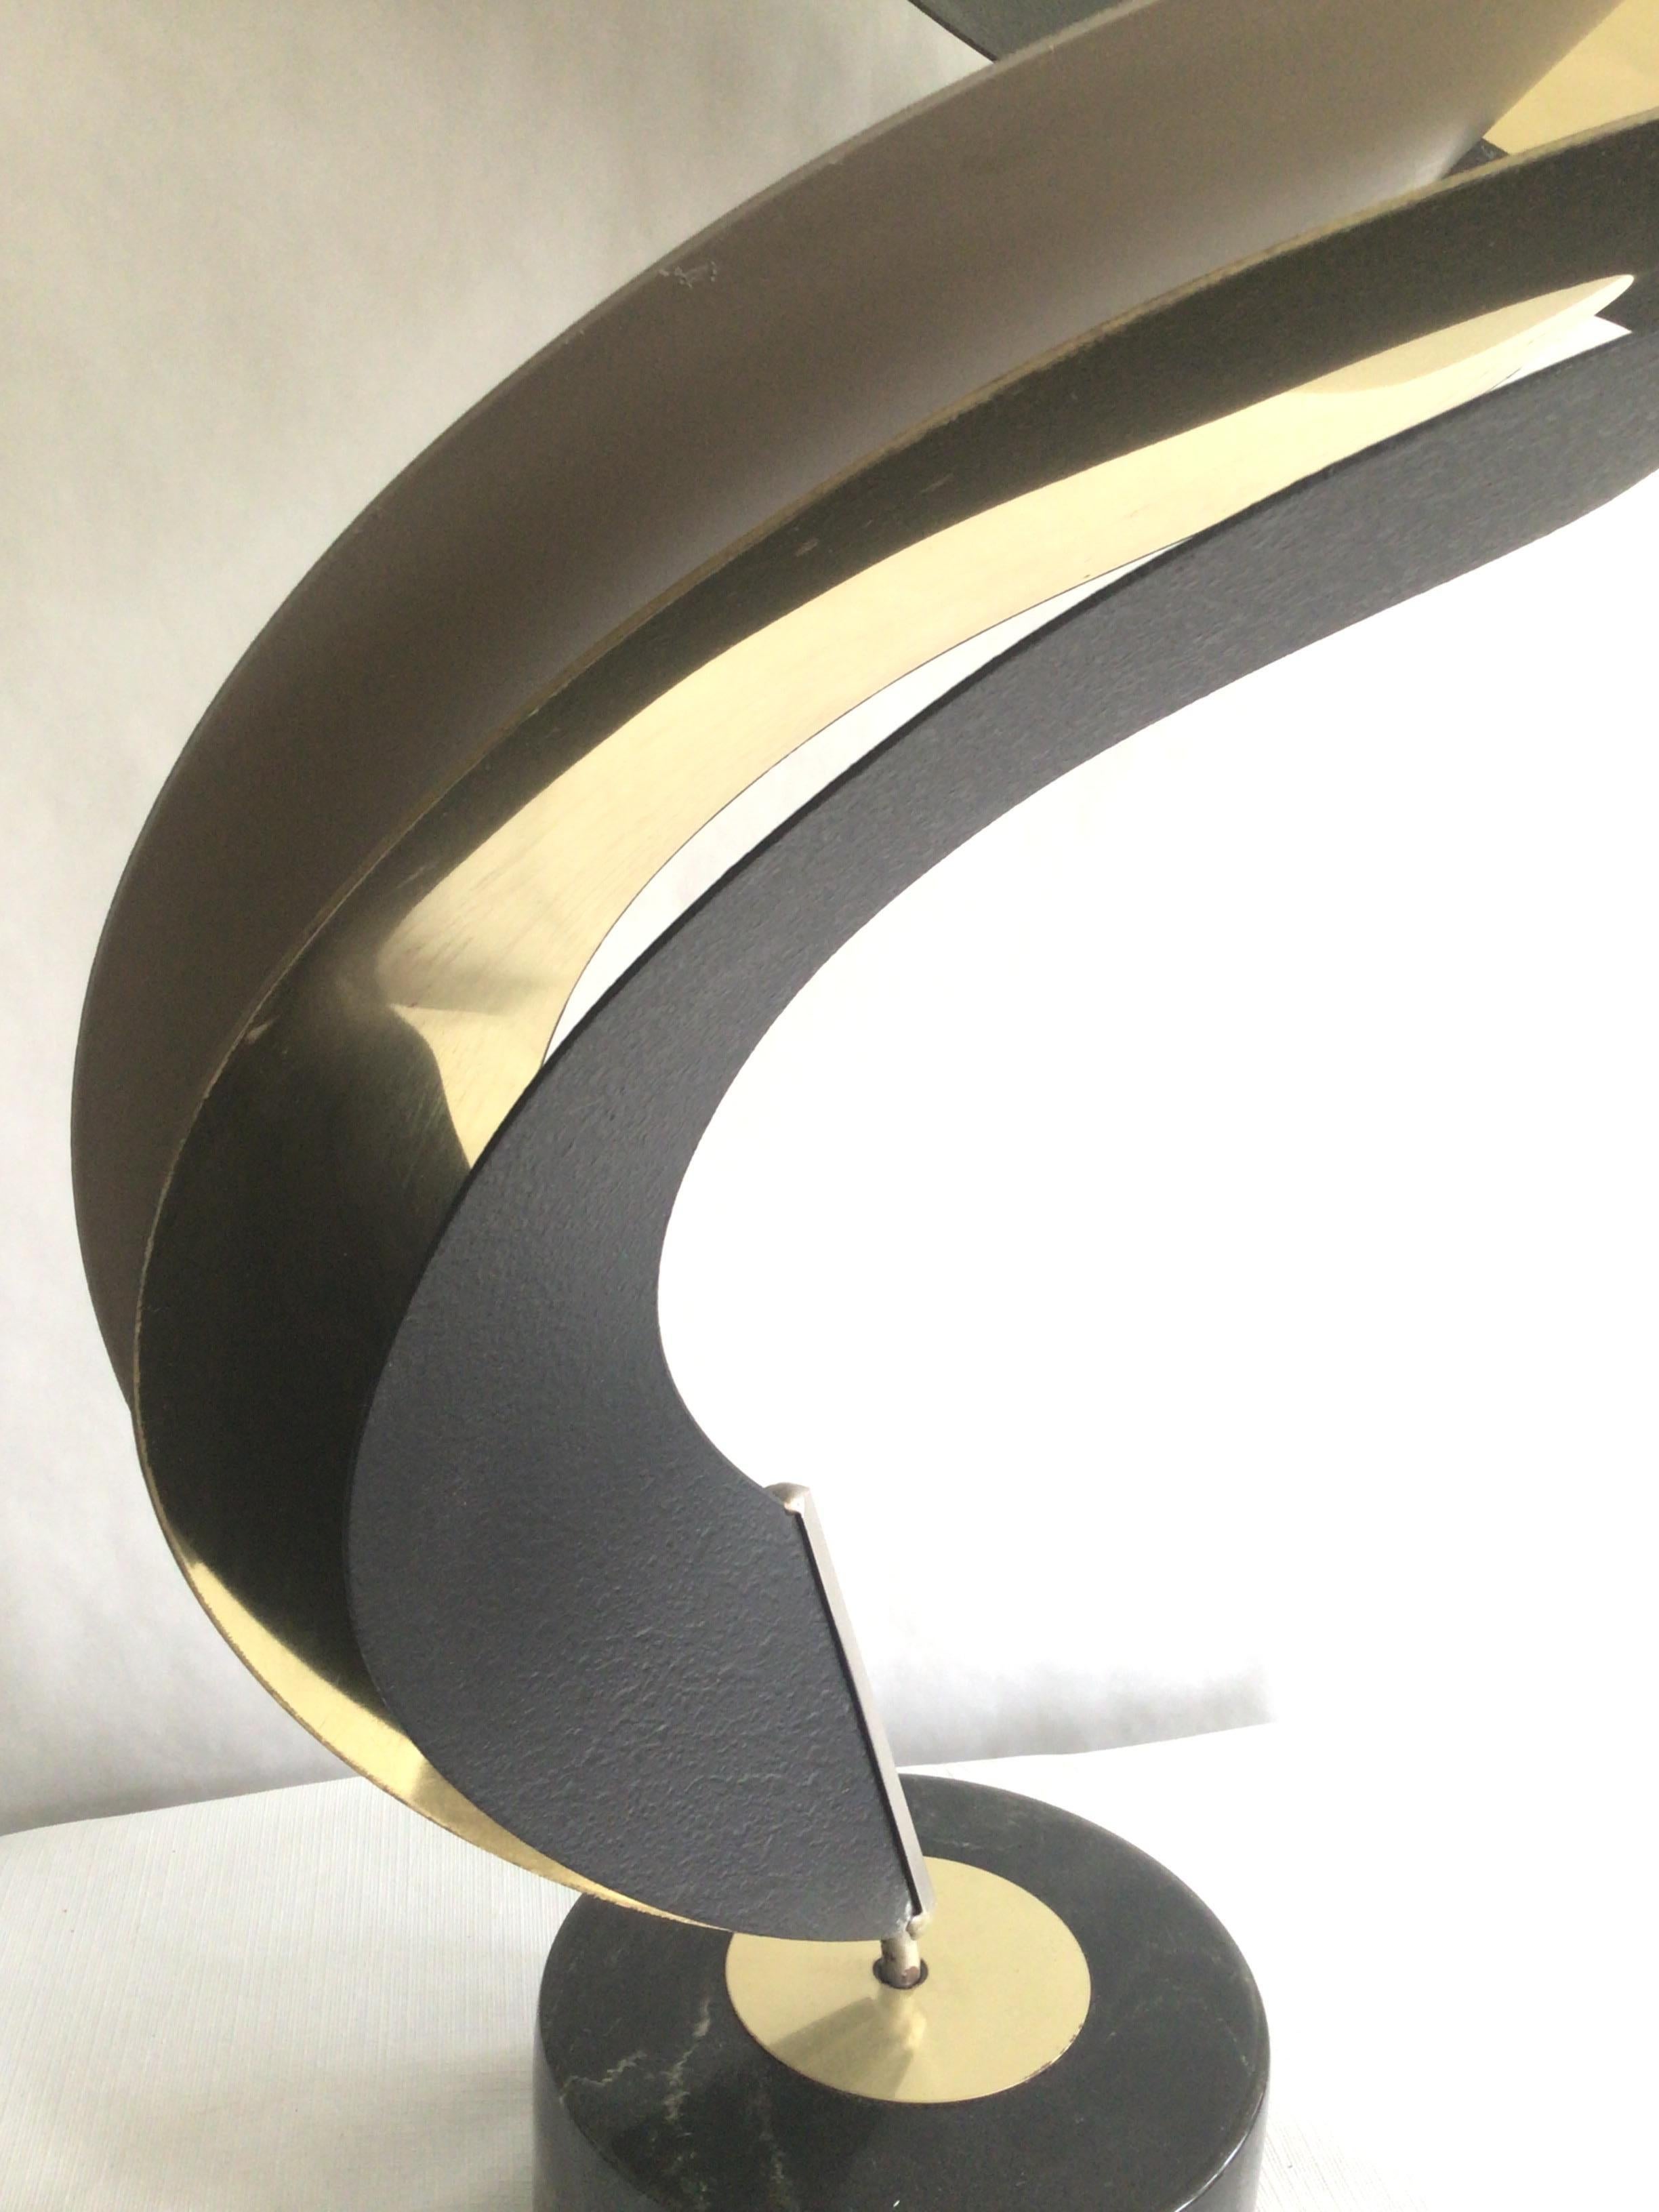 1980s Brass Steel and Aluminum Swirled Sculpture on Swivel Base For Sale 2